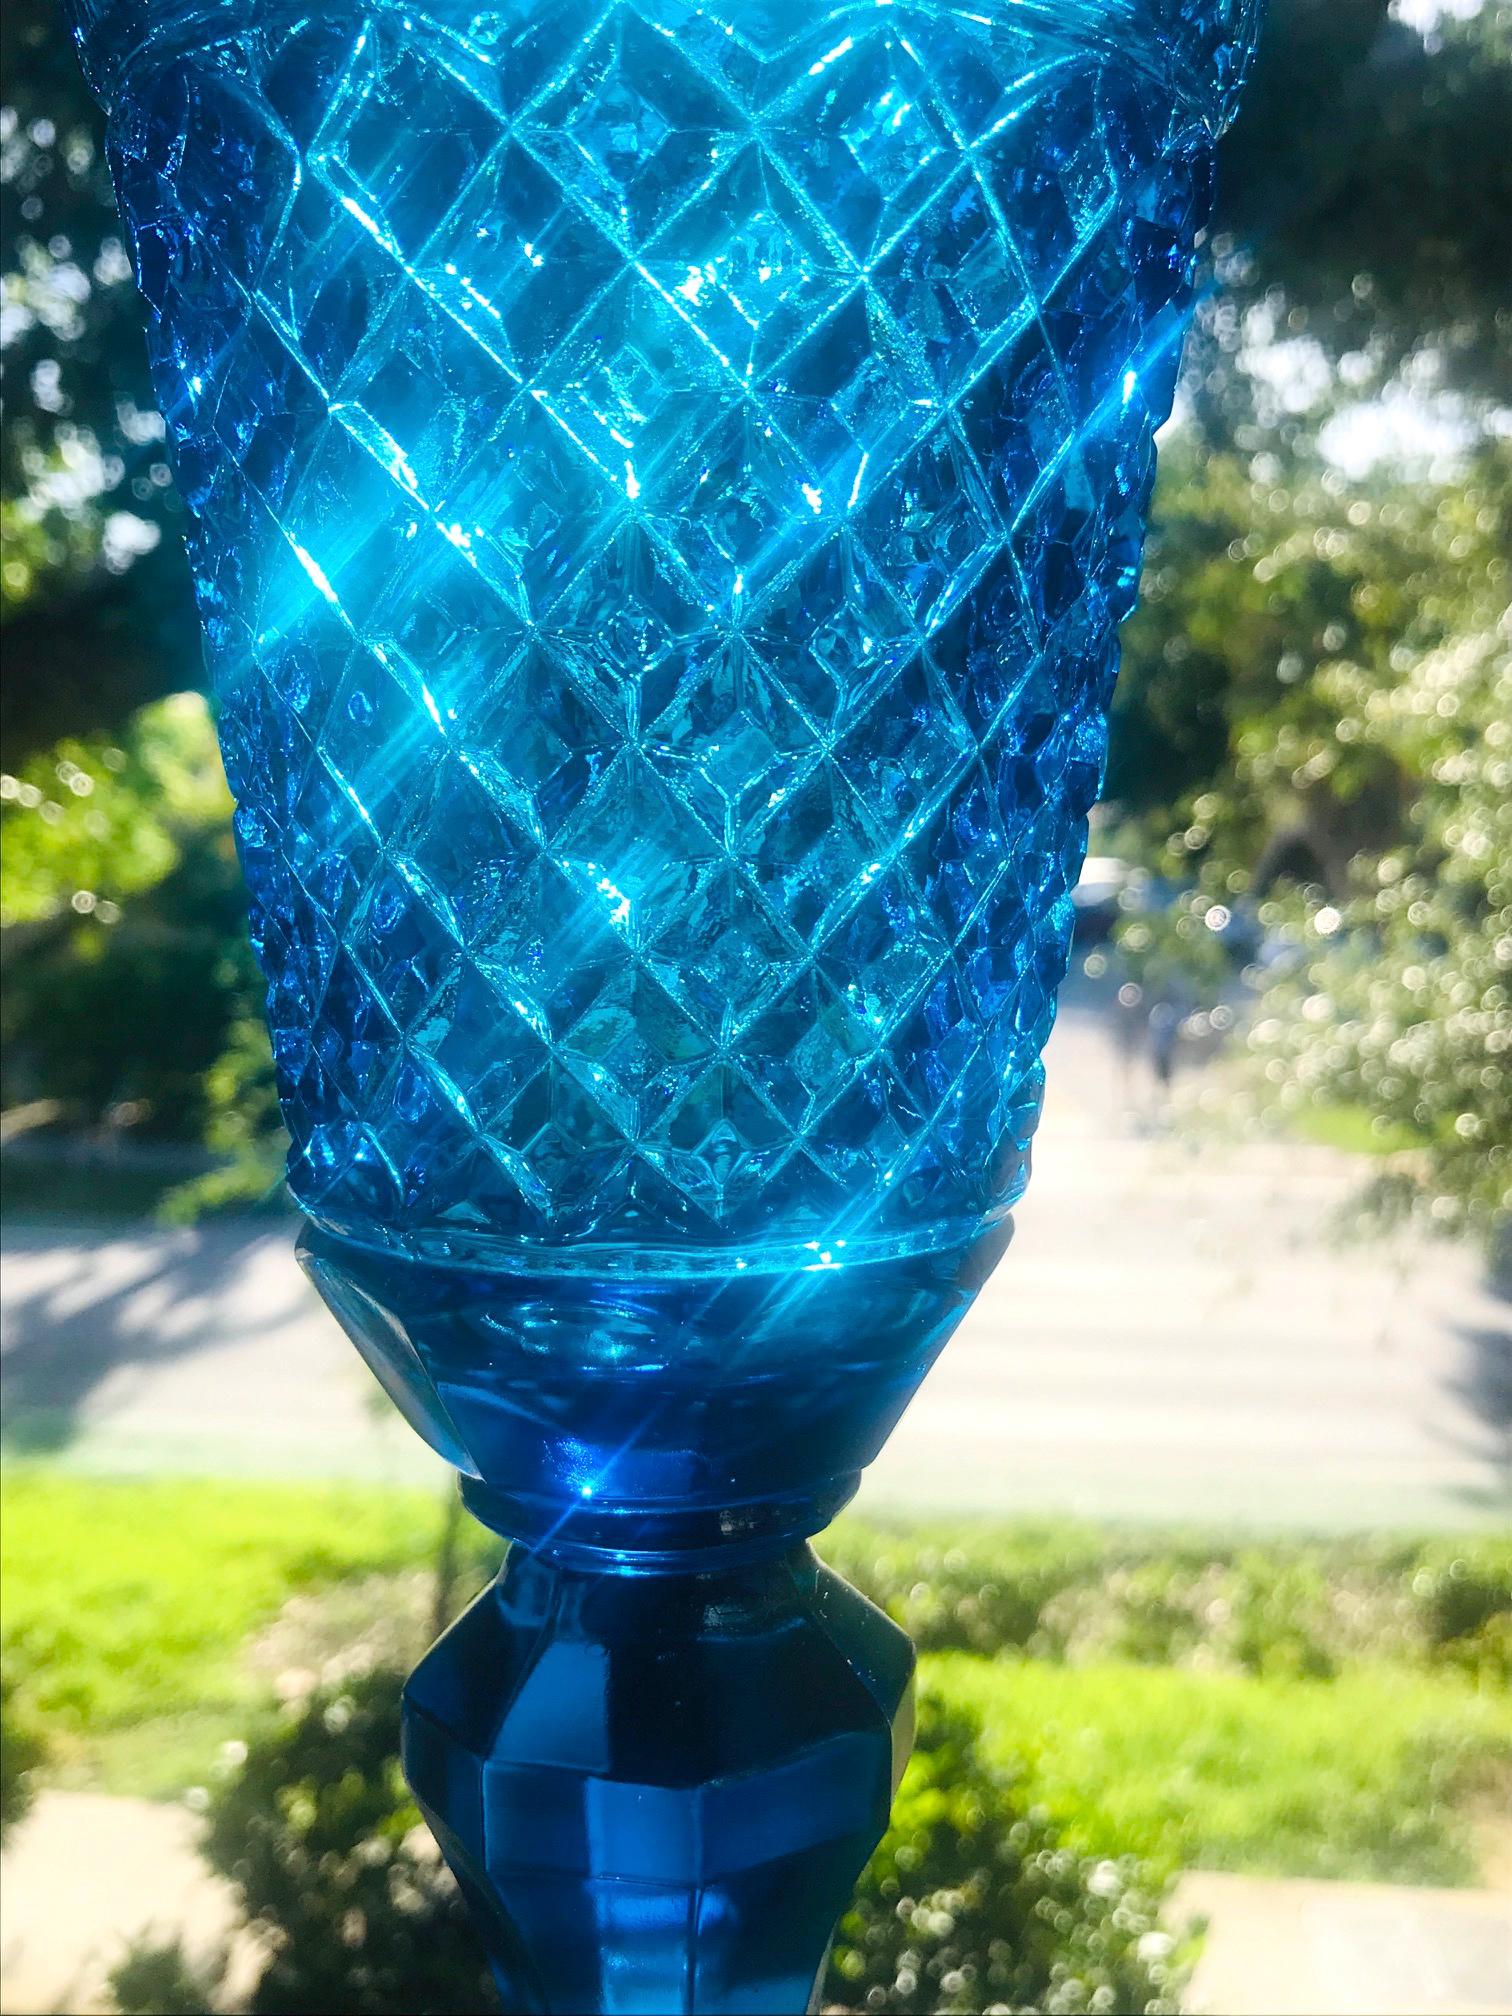 Mid-20th Century Hollywood Regency Footed Glass Urn with Lid in Vibrant Aqua, 1940s